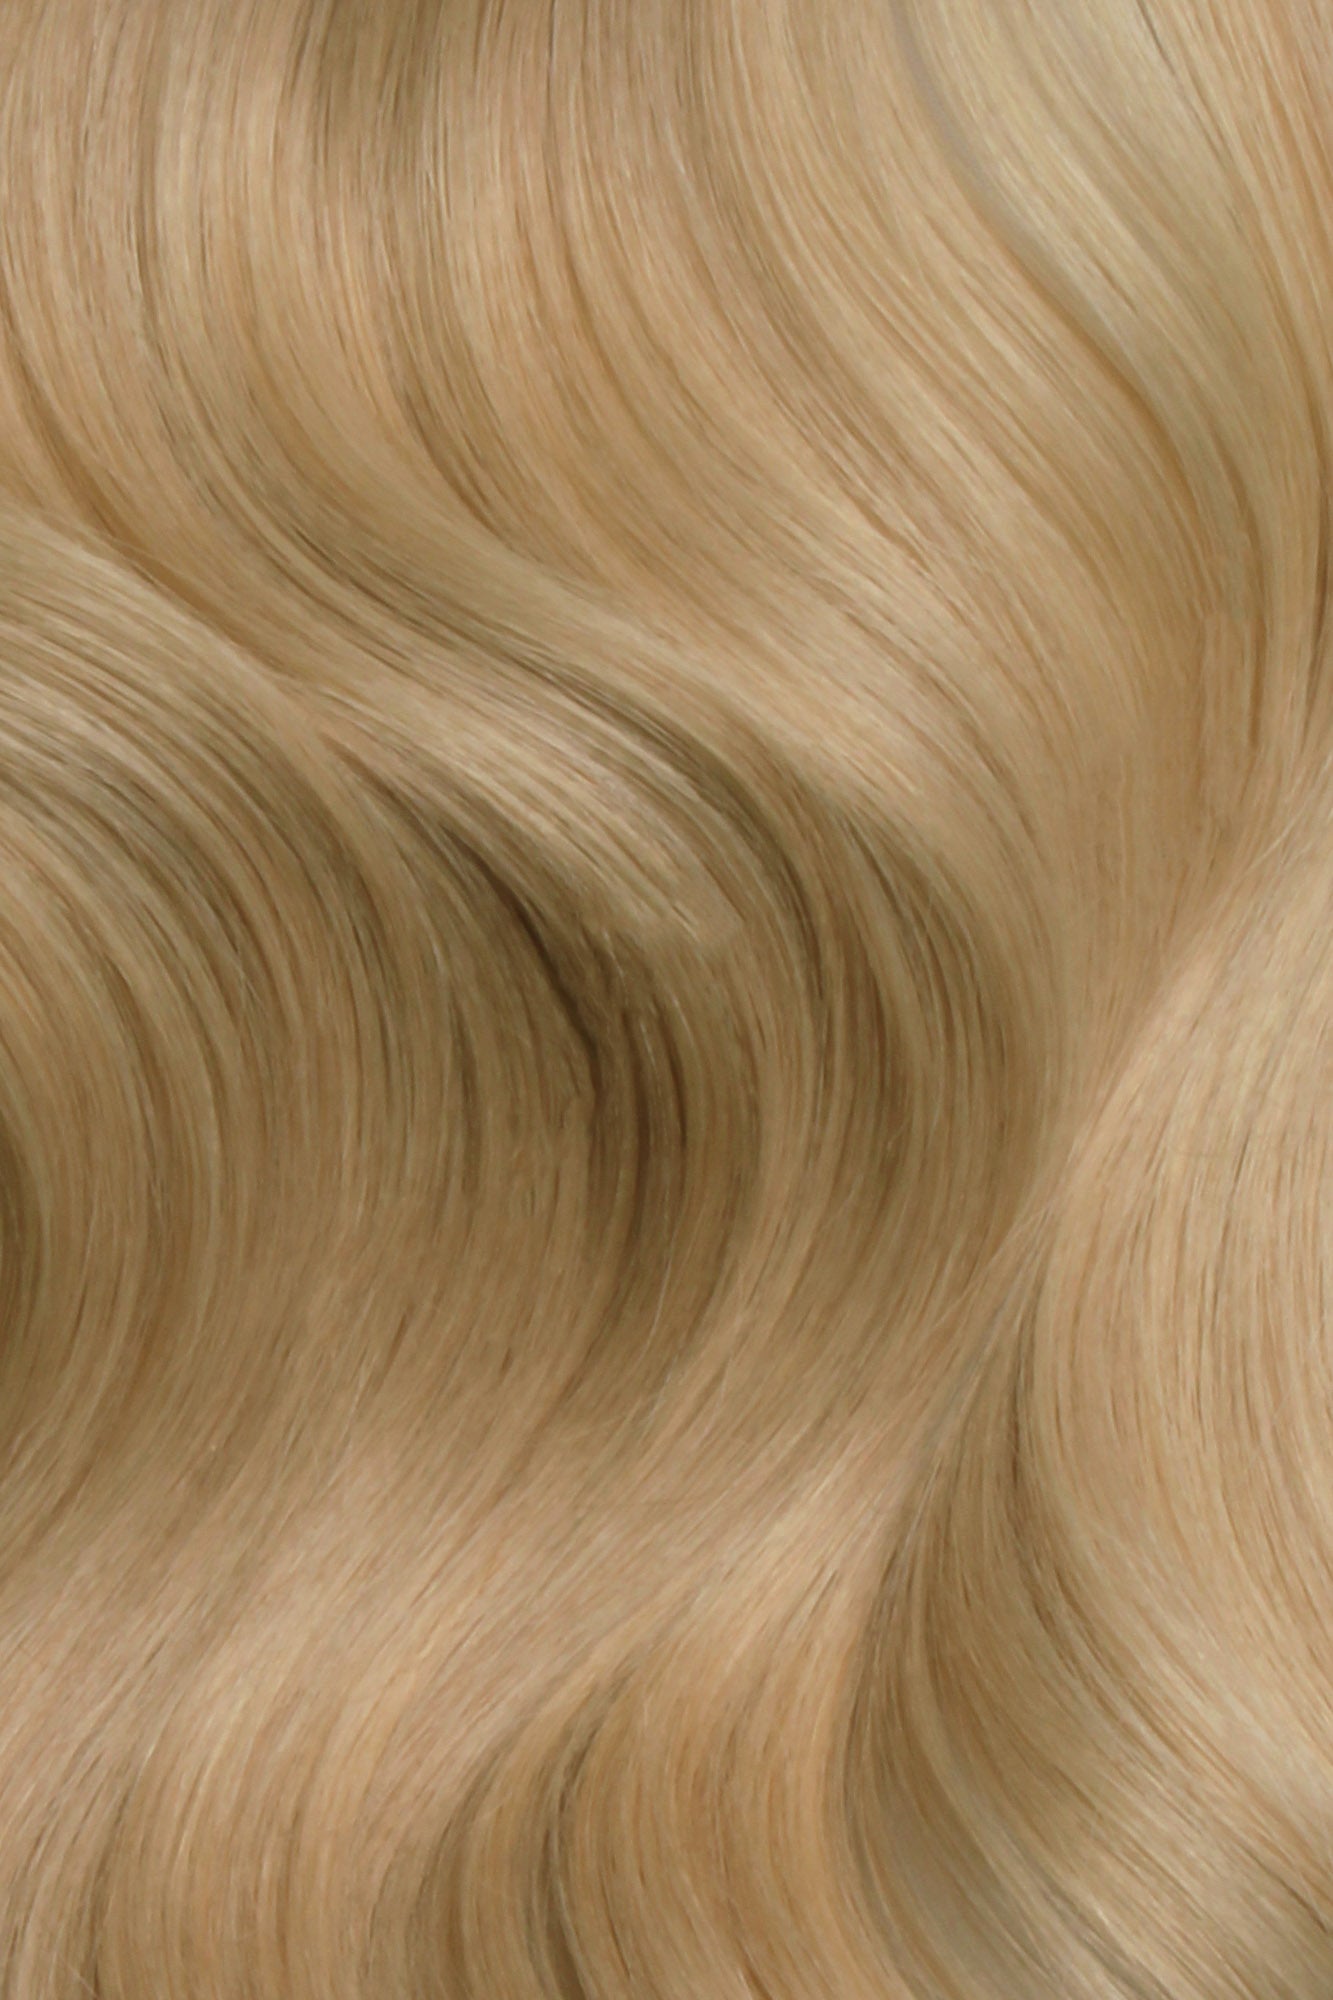 Nano Bonds 22 Inches - SWAY Hair Extensions Beach-Blonde-18-22 Ultra-fine, invisible bonds for a flawless, natural look. 100% Remy Human hair, lightweight and versatile. Reusable and perfect for individual or salon use.